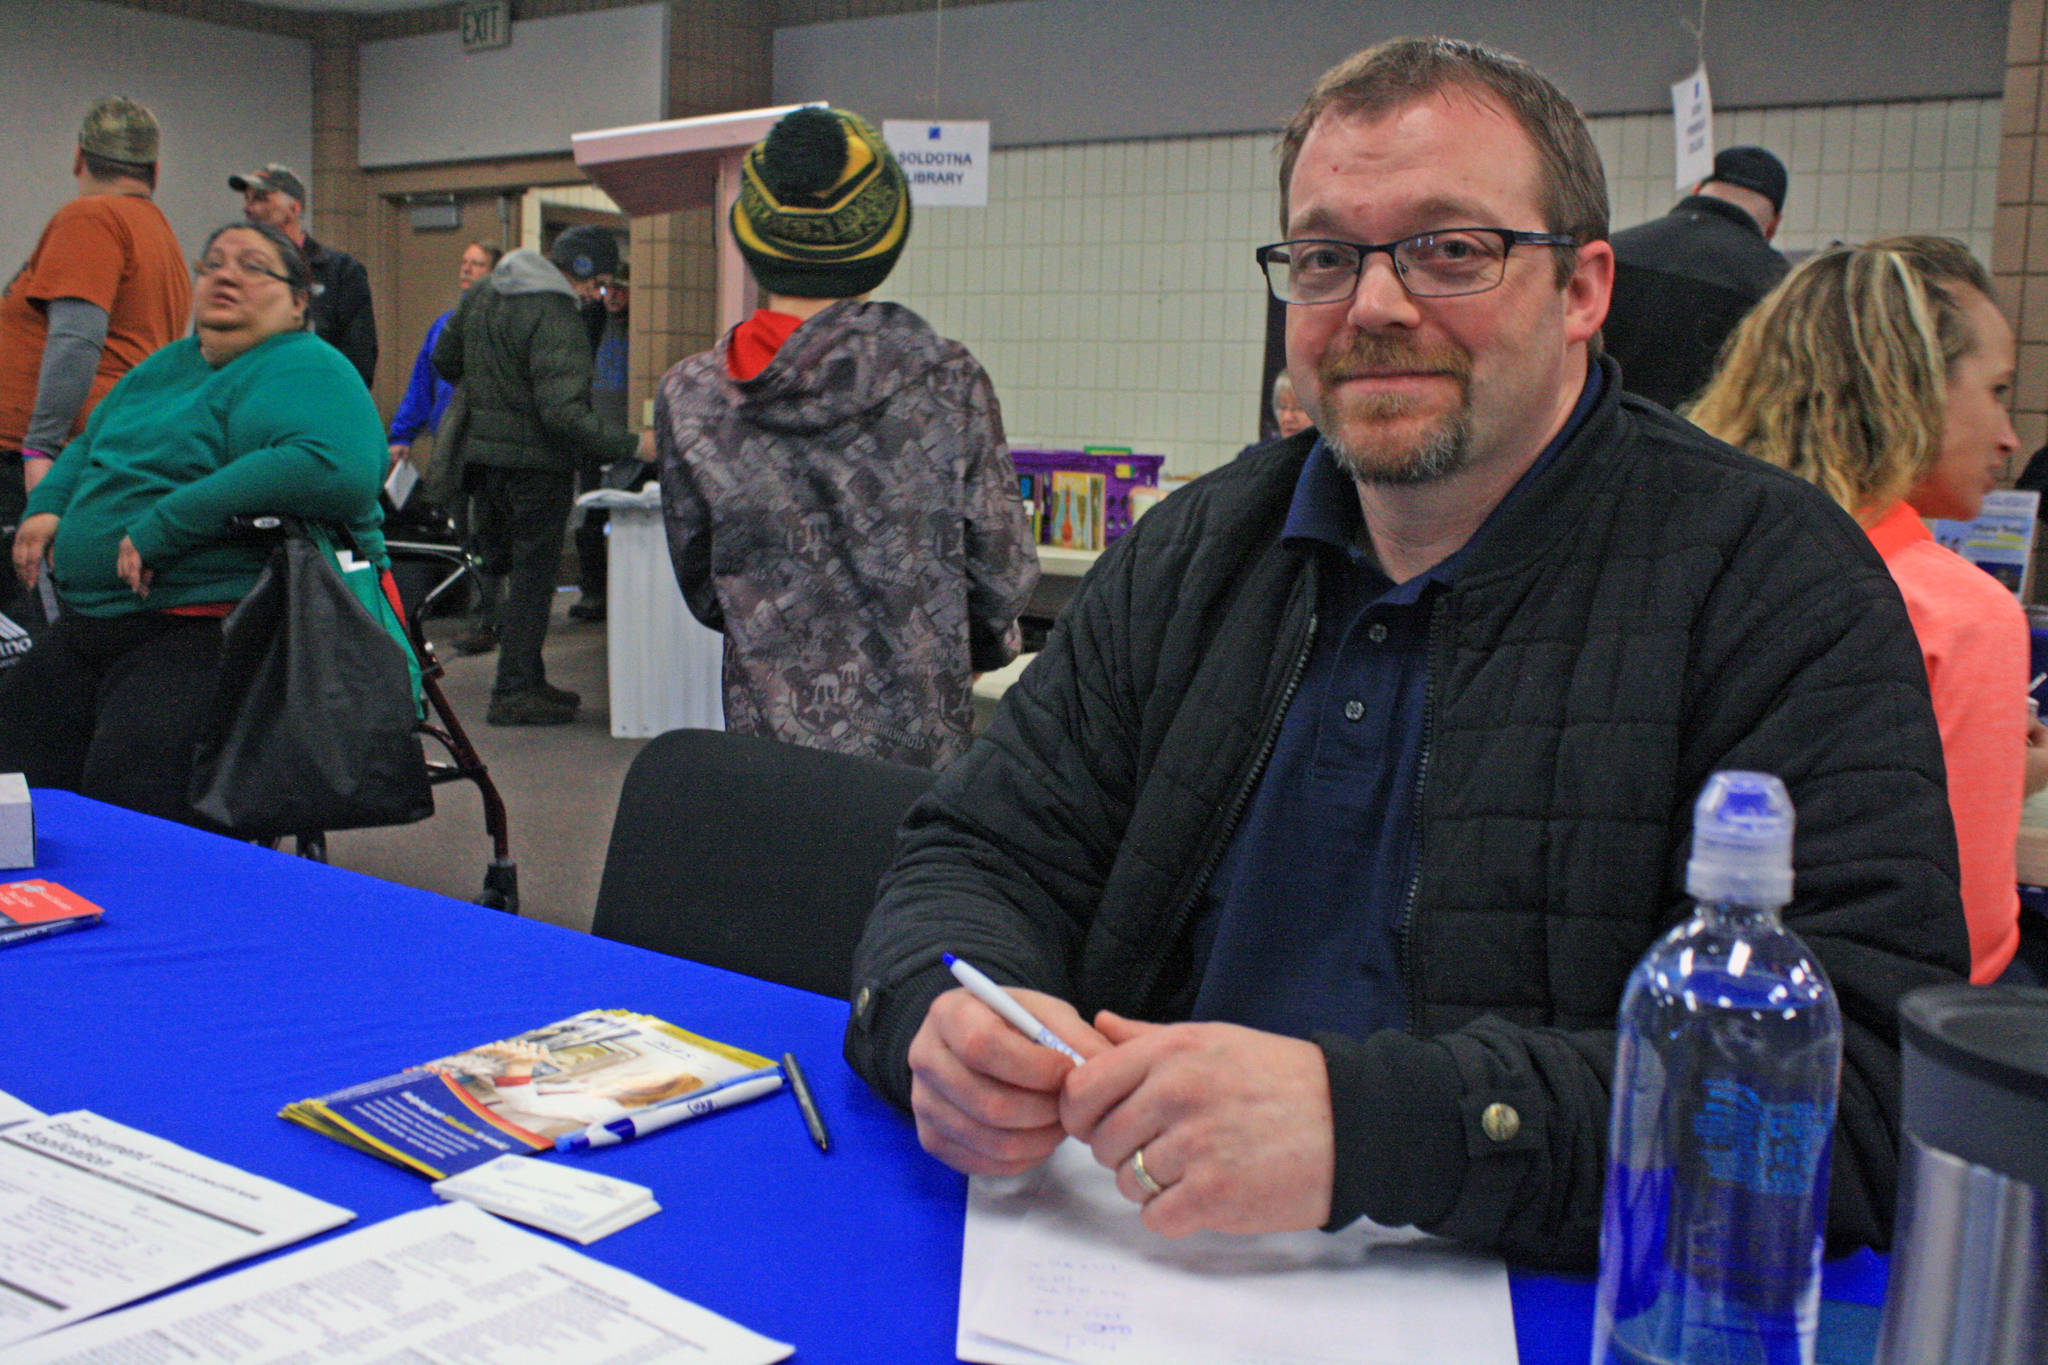 “I think that so far today we’ve had a few people who we see in the job center who don’t always engage in conversation with us. But in this forum they seem to ask more questions, and it’s an opportunity to encourage them to speak up and ask for help.” — Jason Warfle, an employment services technician with the Department of Labor